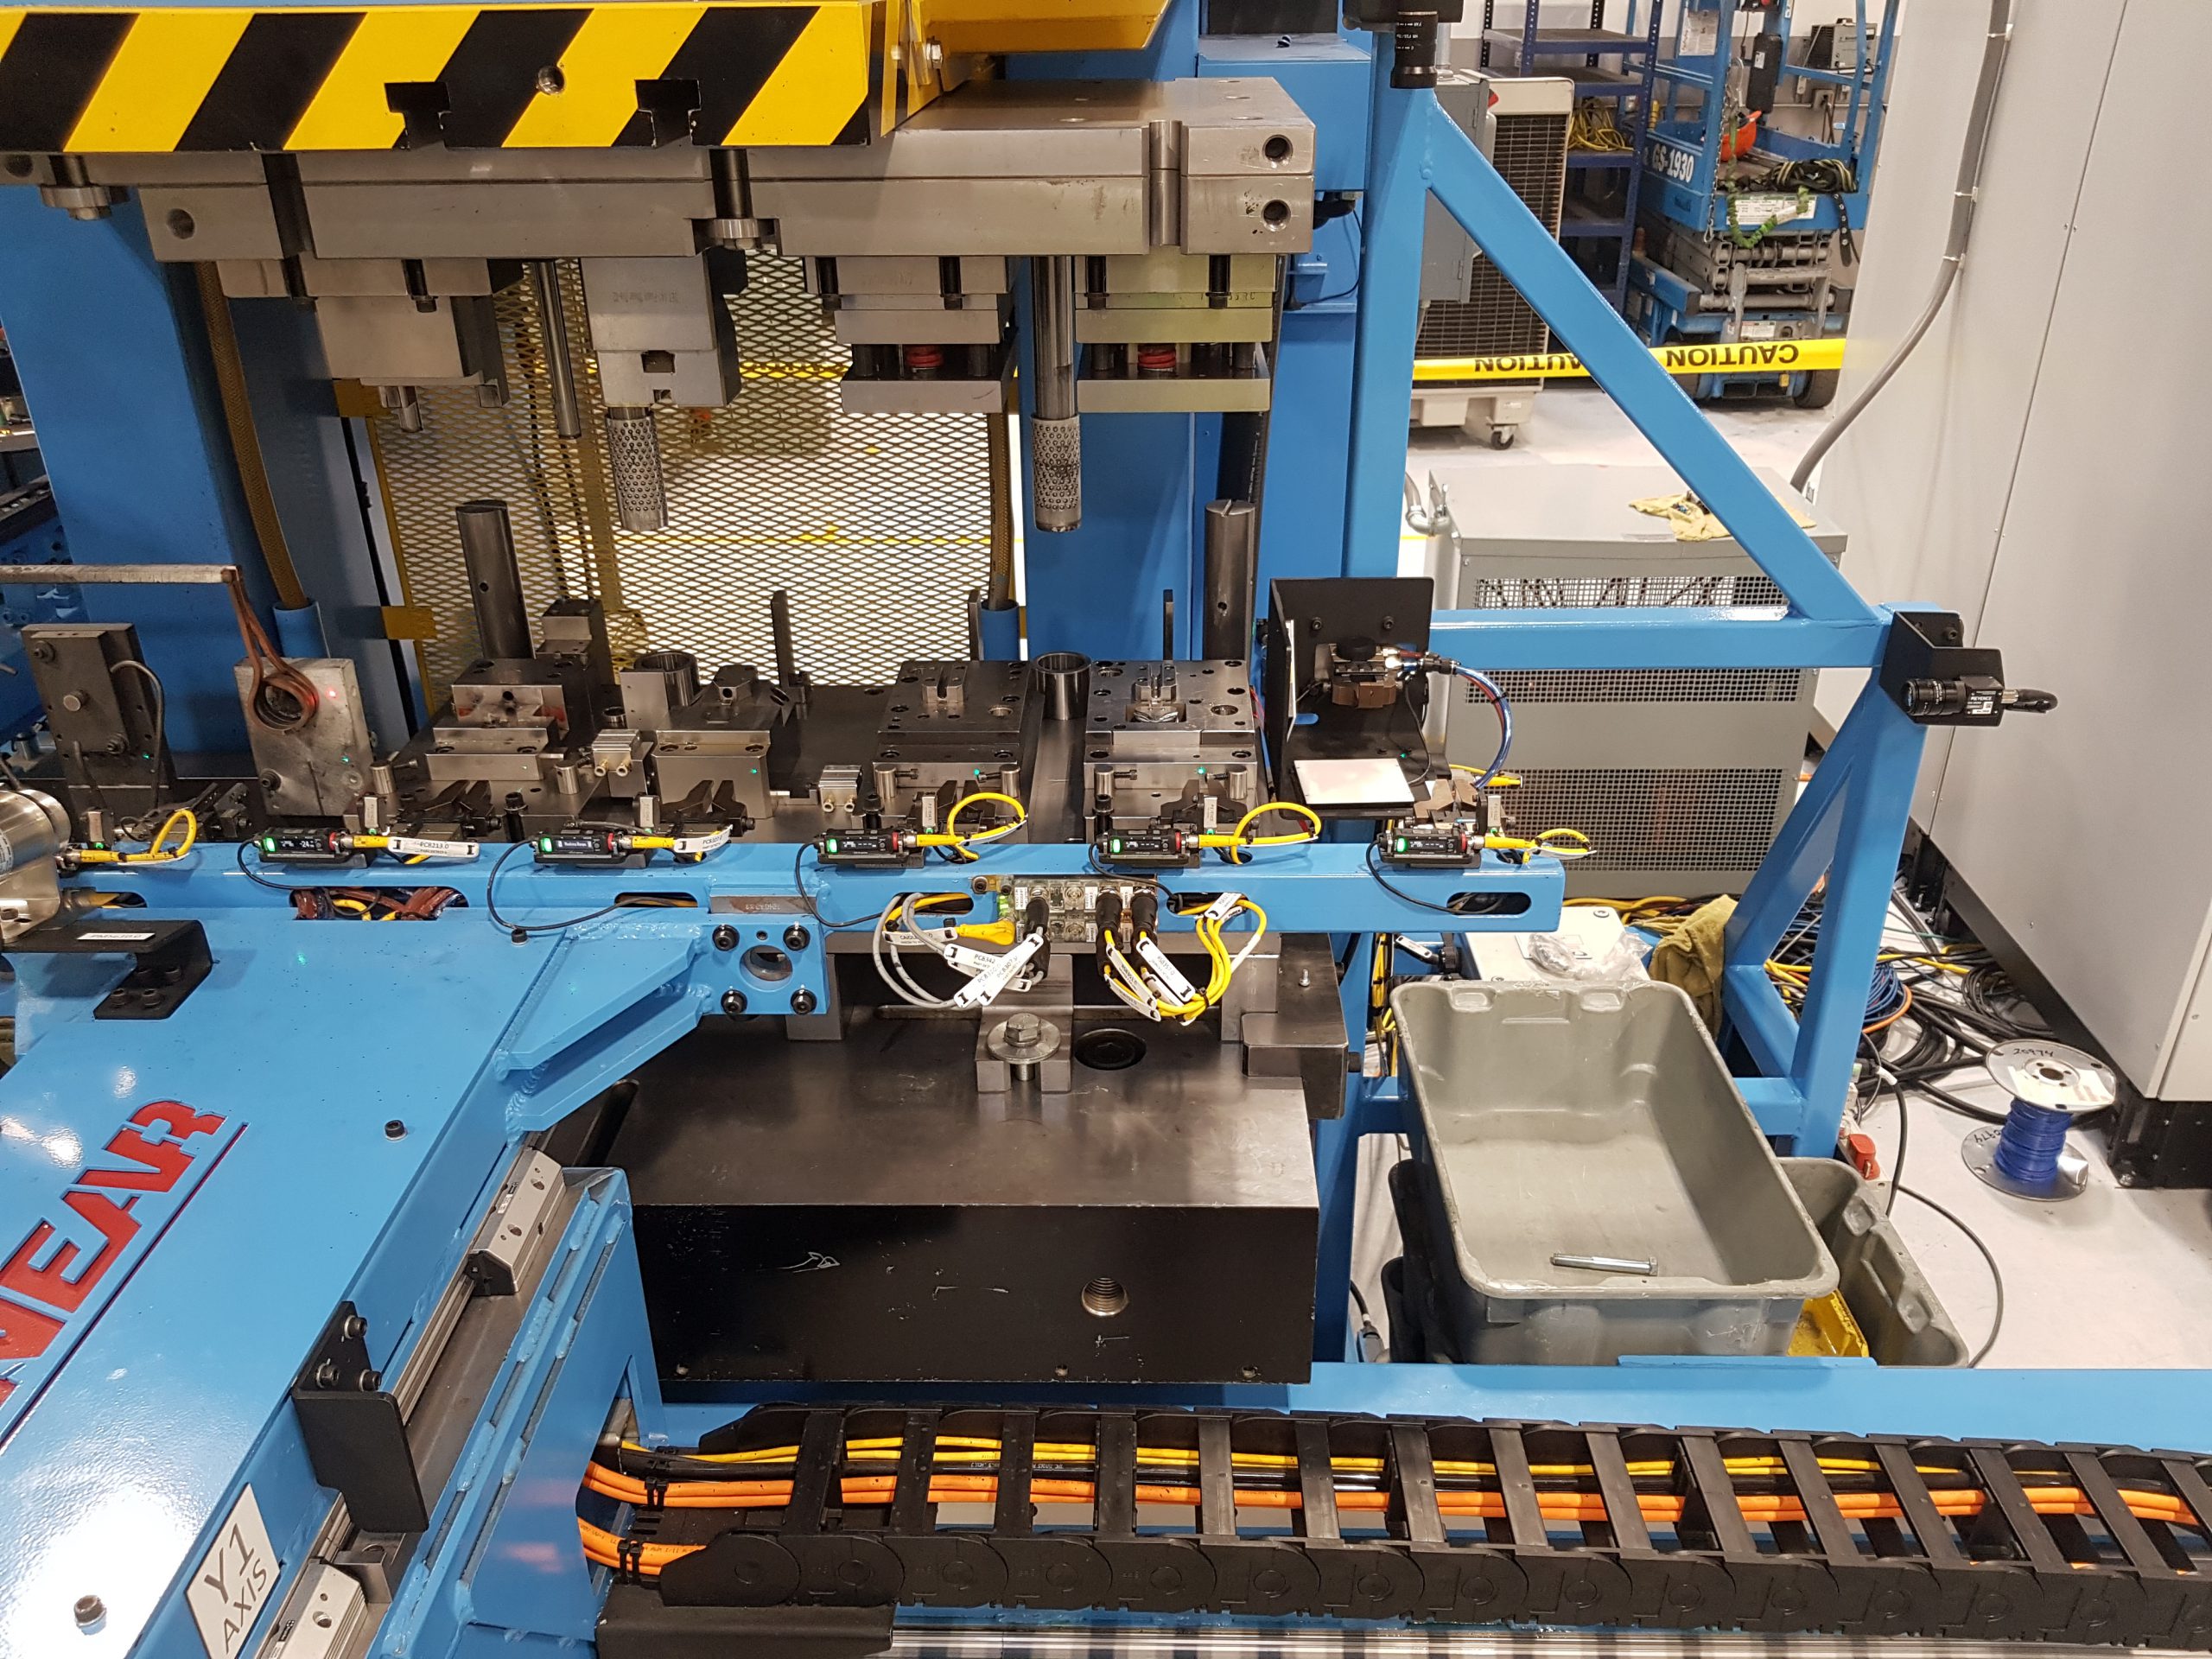 An image of a blue, forging machine with a custom Linear Automation transfer system.